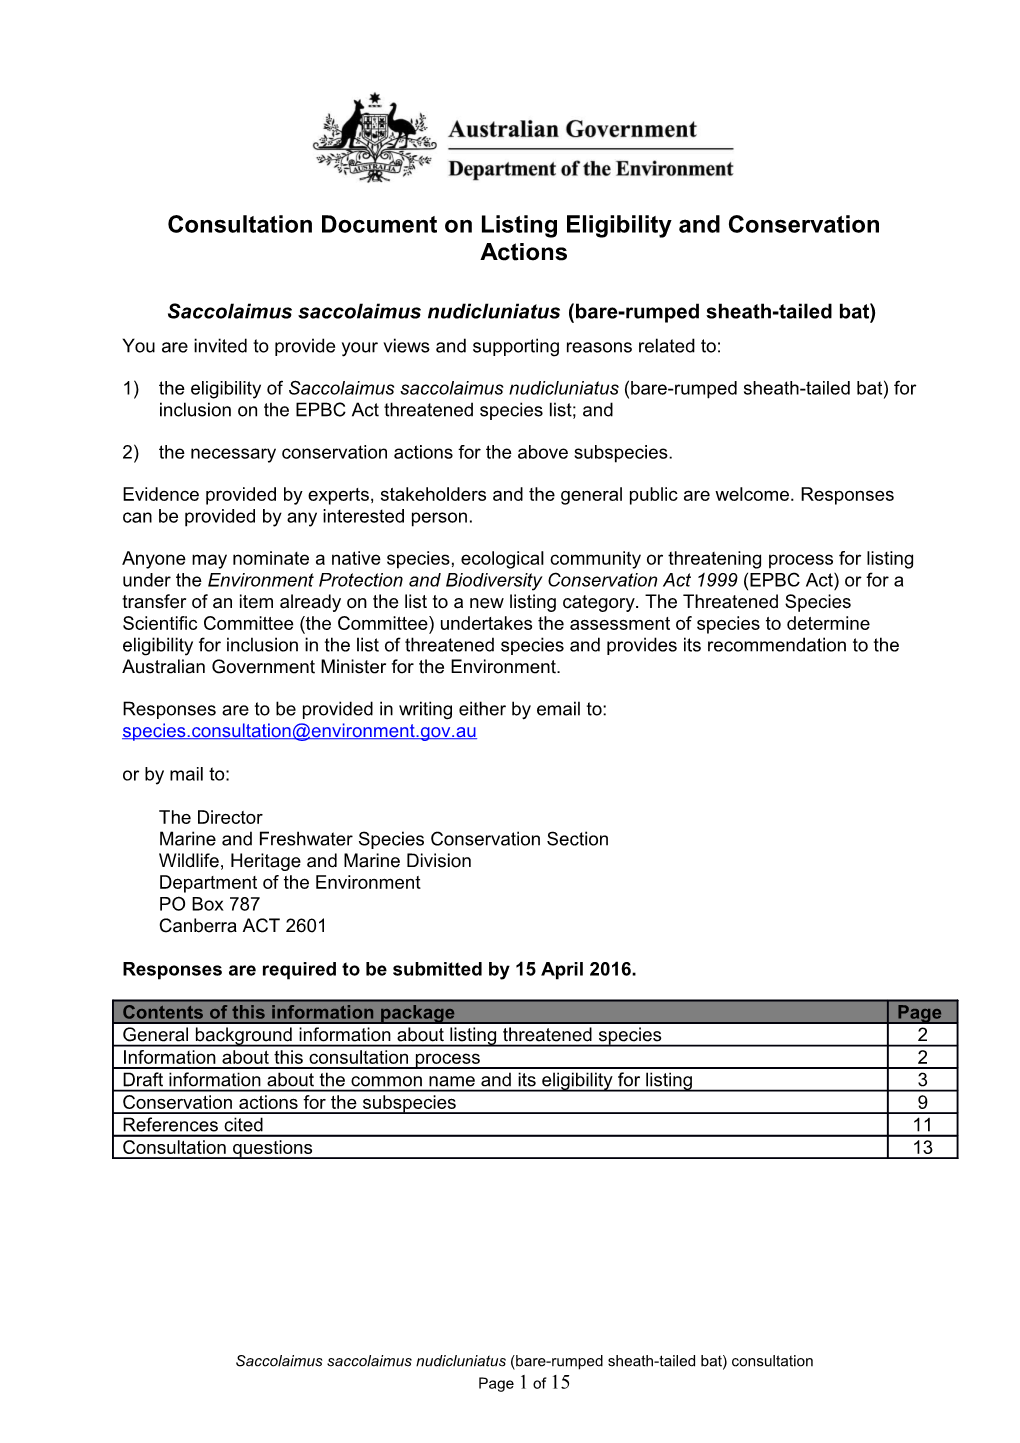 Consultation Document on Listing Eligibility and Conservation Actions Saccolaimus Saccolaimus